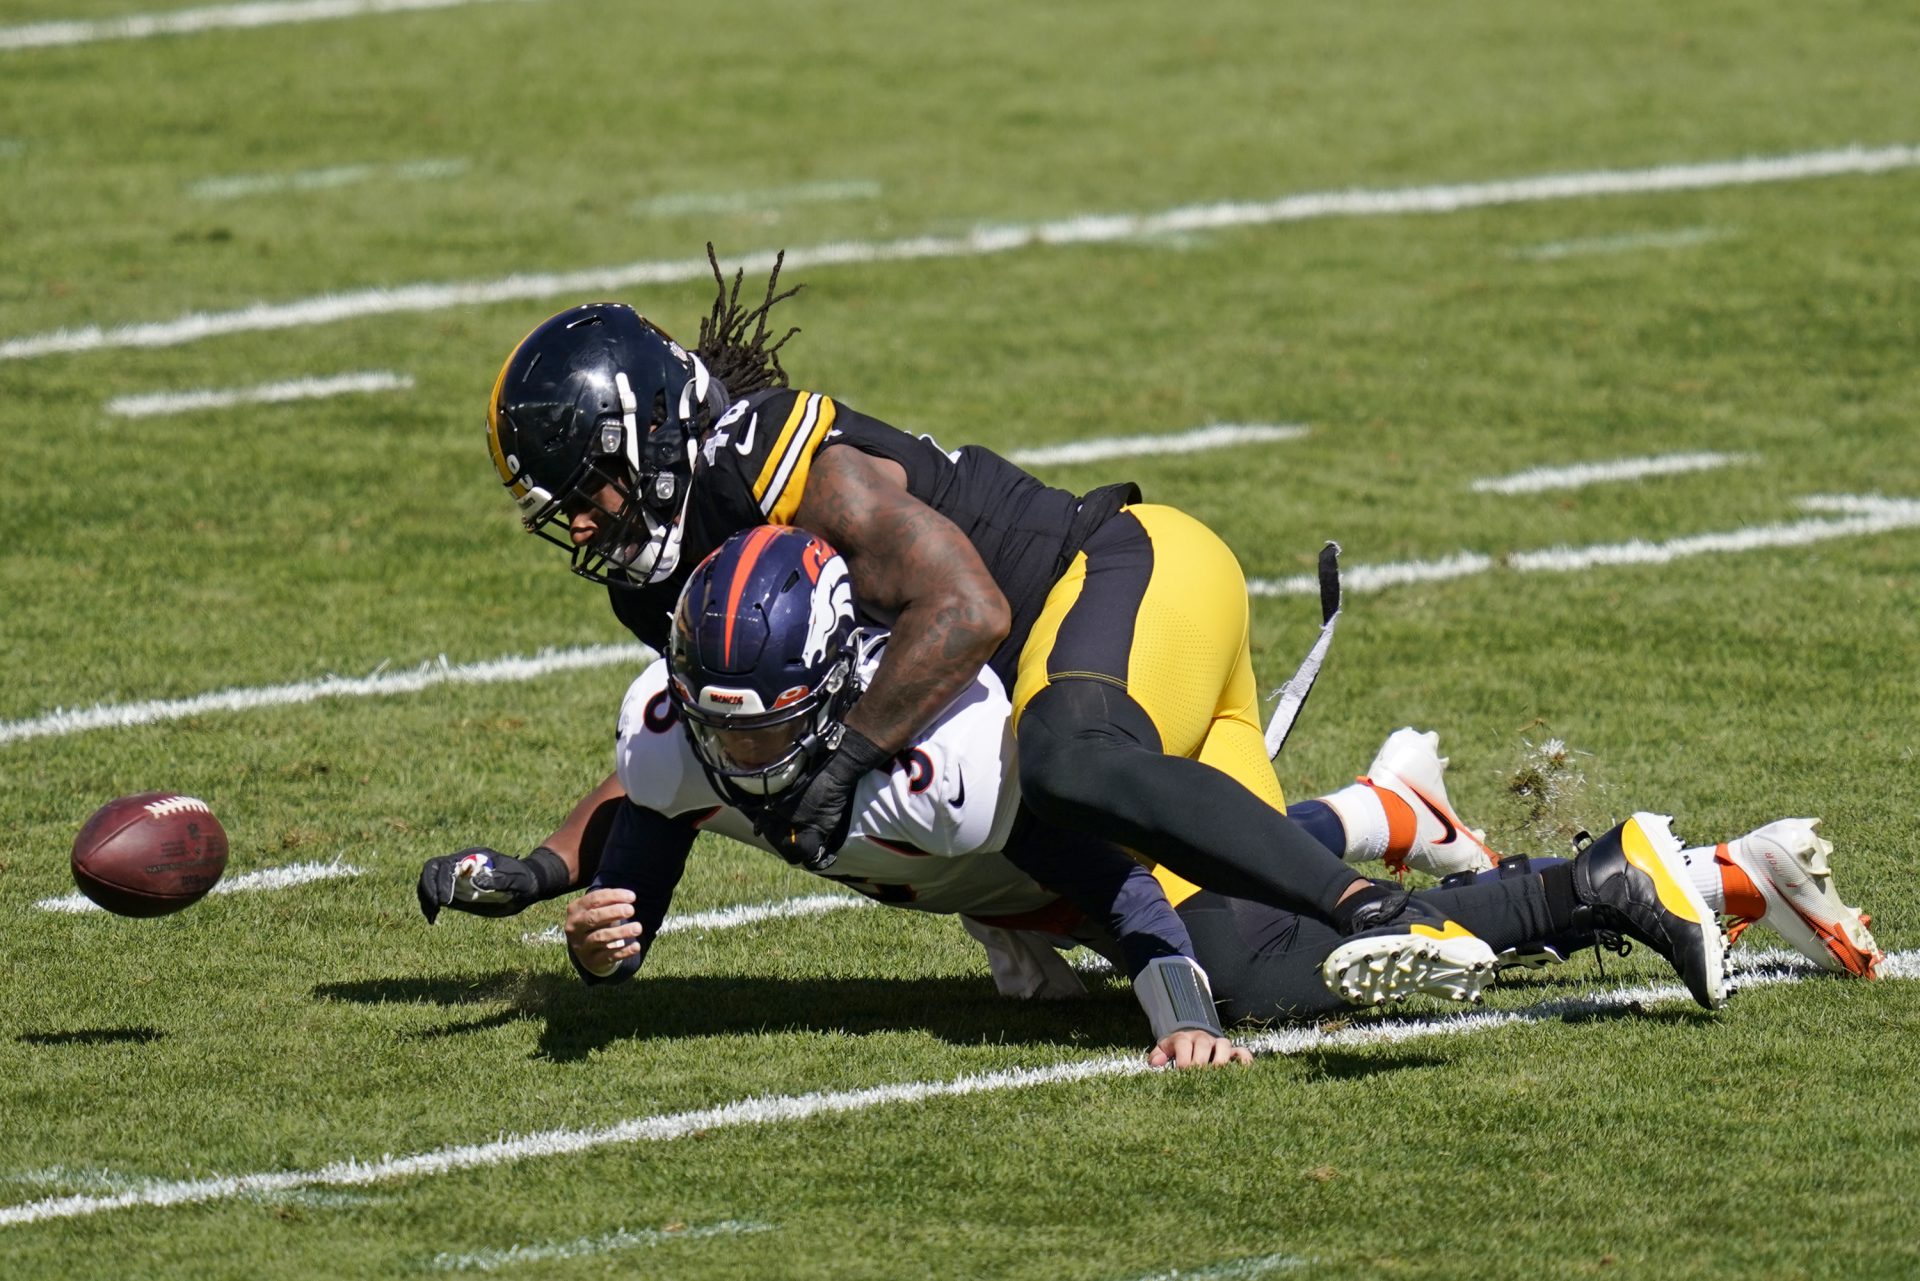 Pittsburgh Steelers outside linebacker Bud Dupree (48) forces a fumble by Denver Broncos quarterback Drew Lock (3) during the first half of an NFL football game, Sunday, Sept. 20, 2020, in Pittsburgh. The Steelers recovered the fumble and Lock was injured on the play.